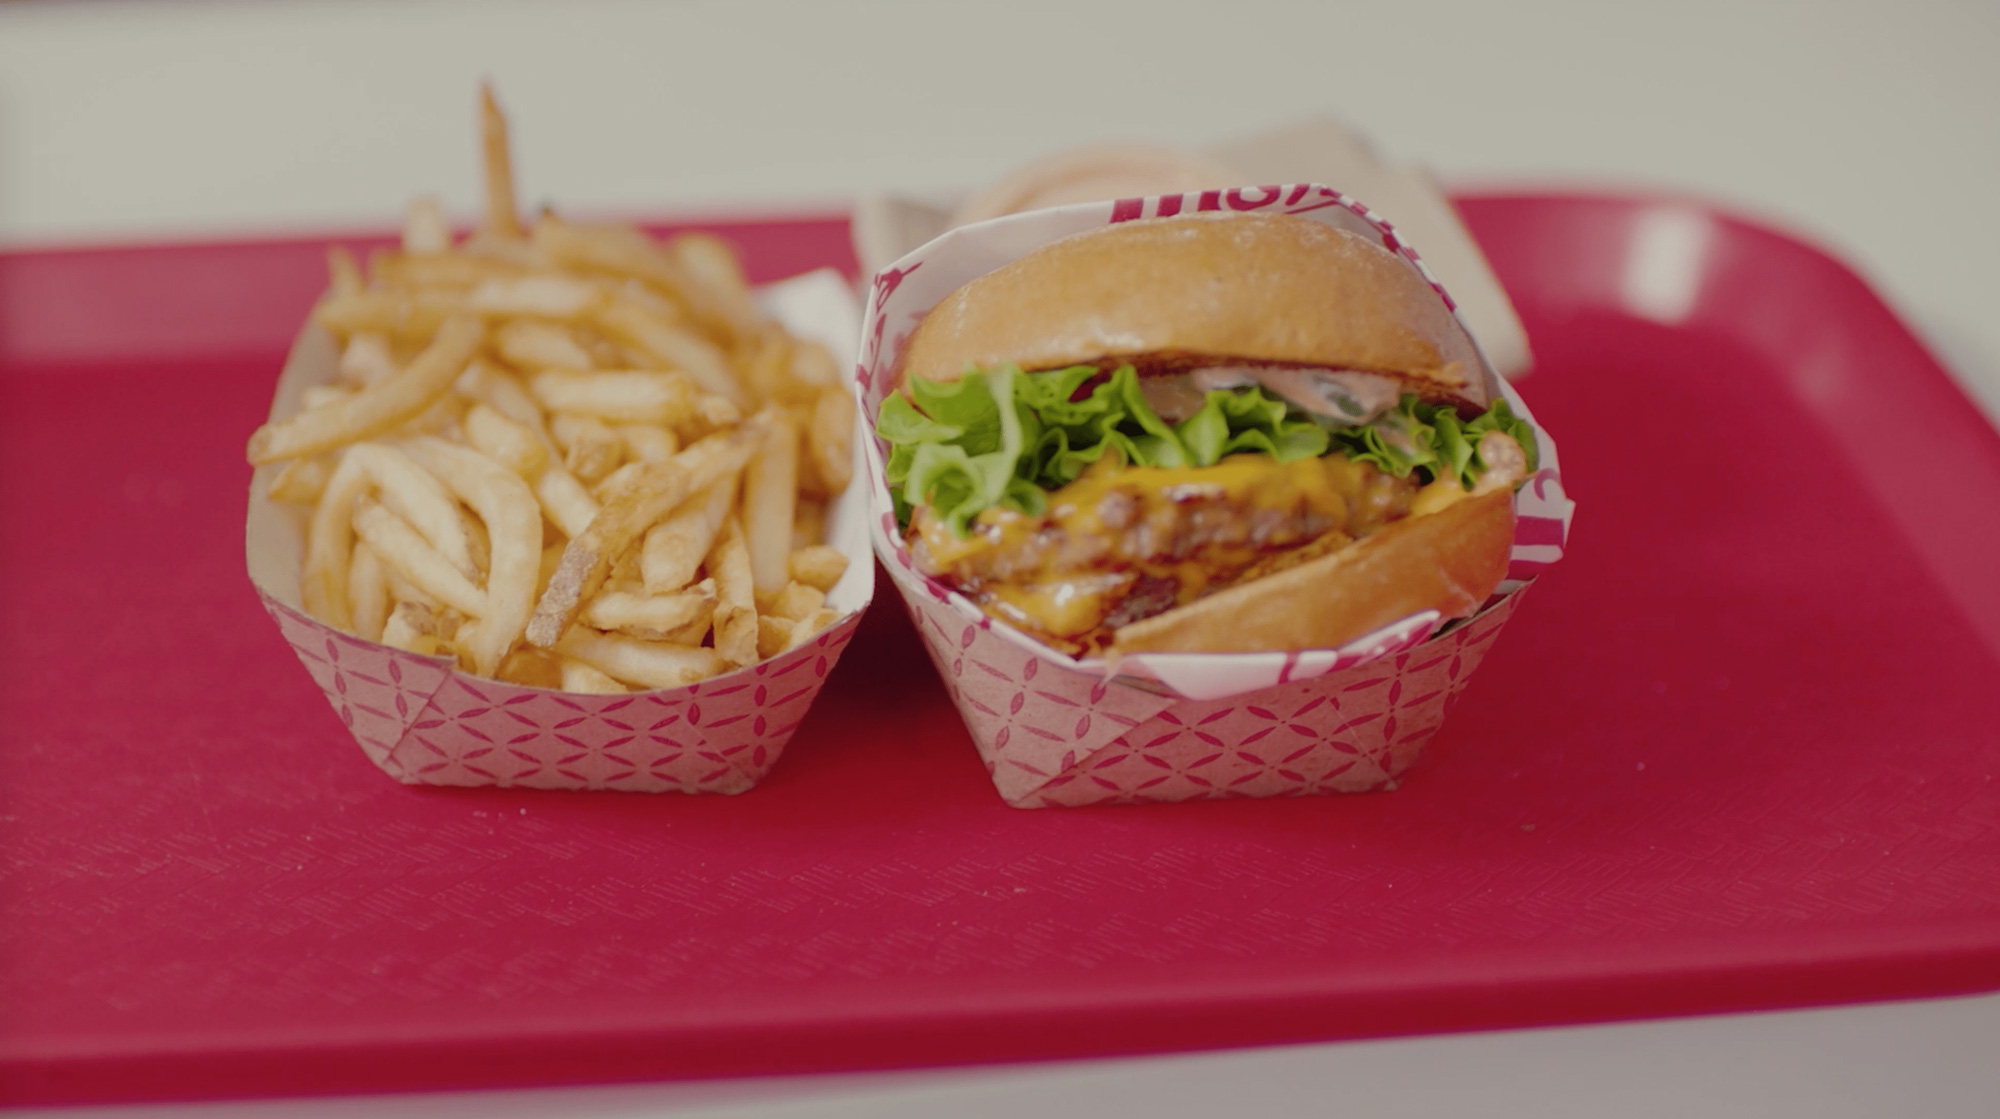 Two small paper baskets filled with french fries and a vegan burger.